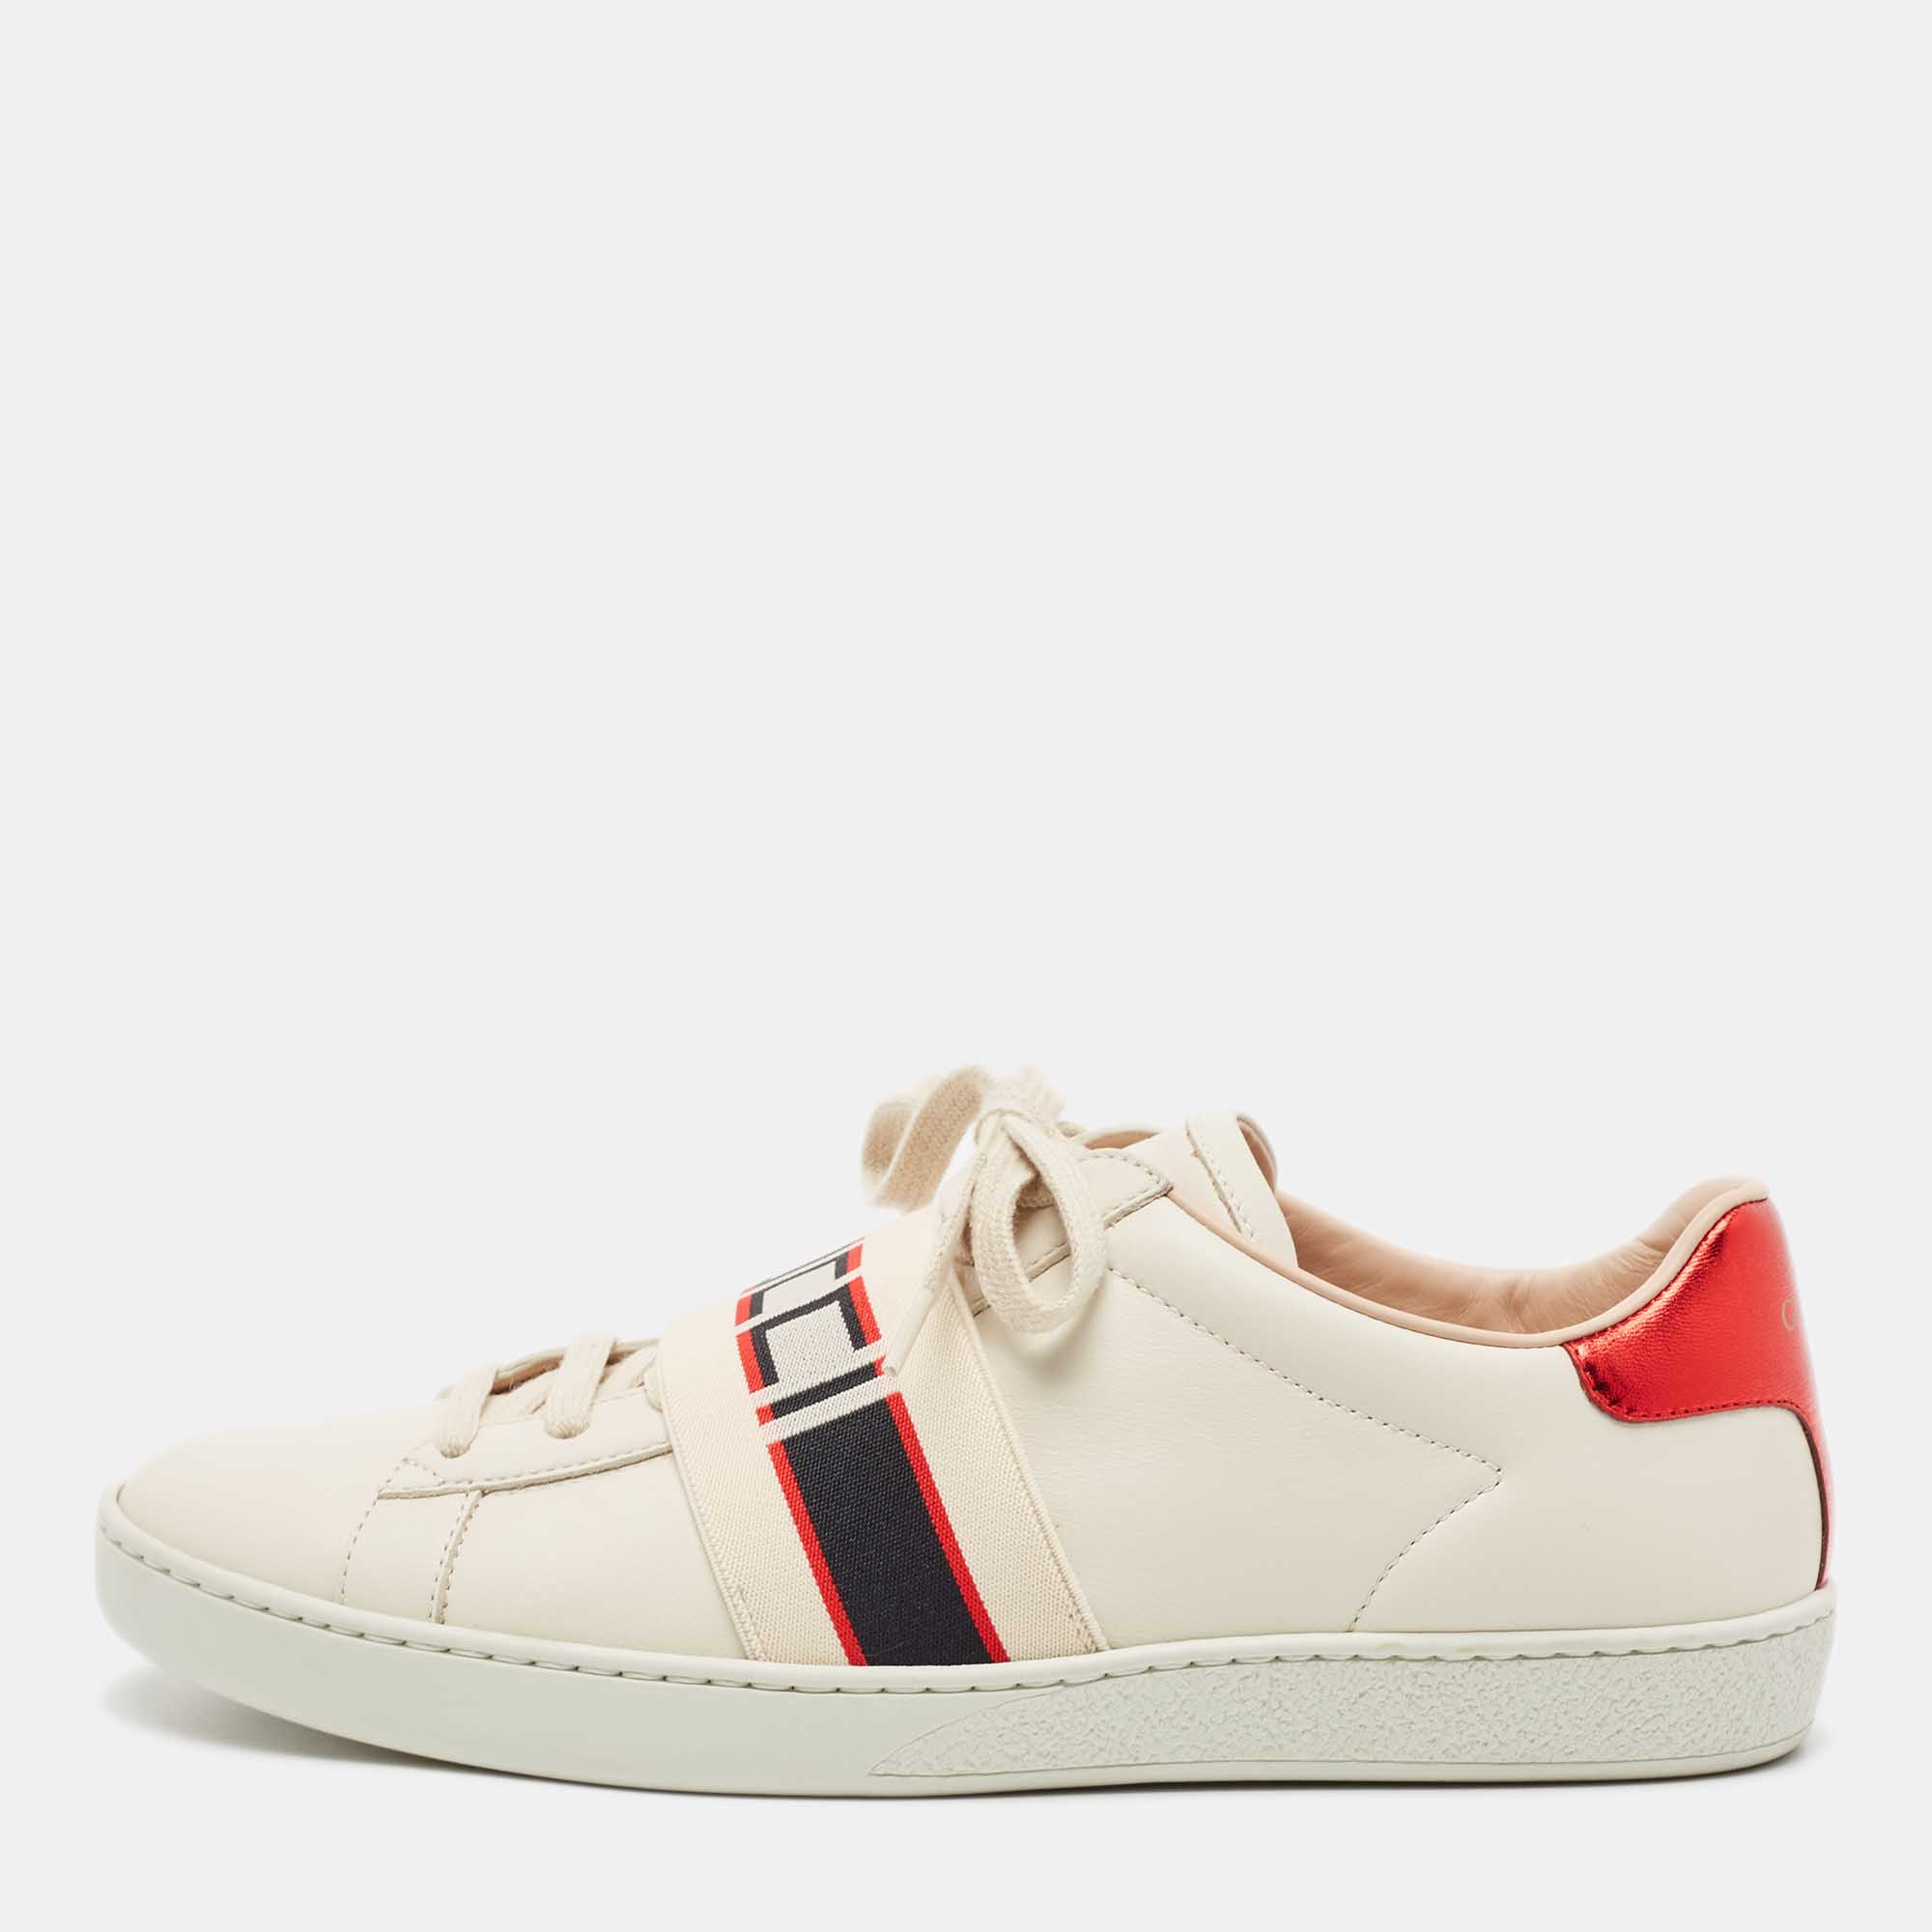 Gucci Cream Leather Logo Elastic Band Ace Sneakers Size 39